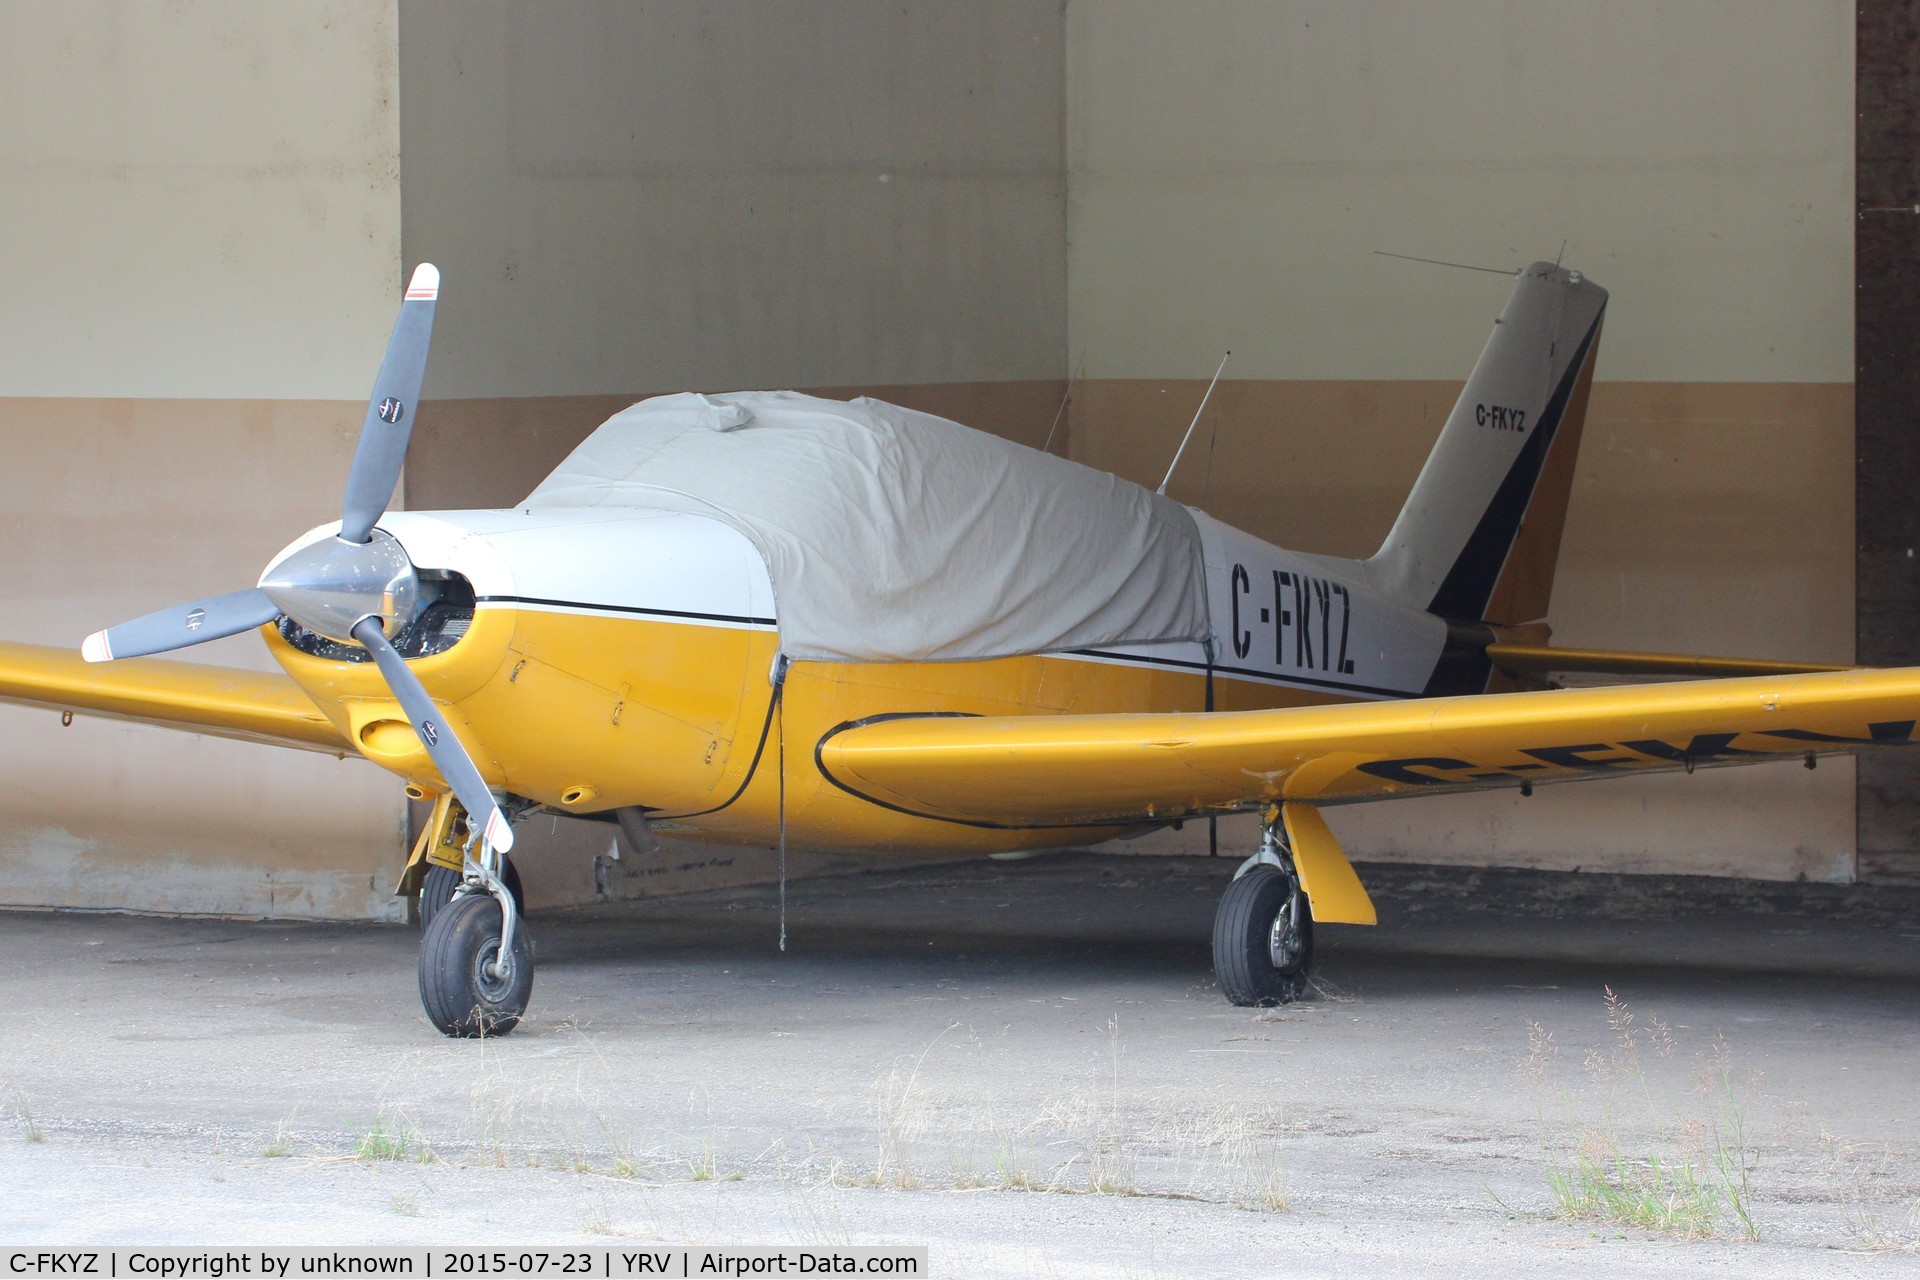 C-FKYZ, 1960 Piper PA-24-250 Comanche C/N 24-1509, White and Yellow